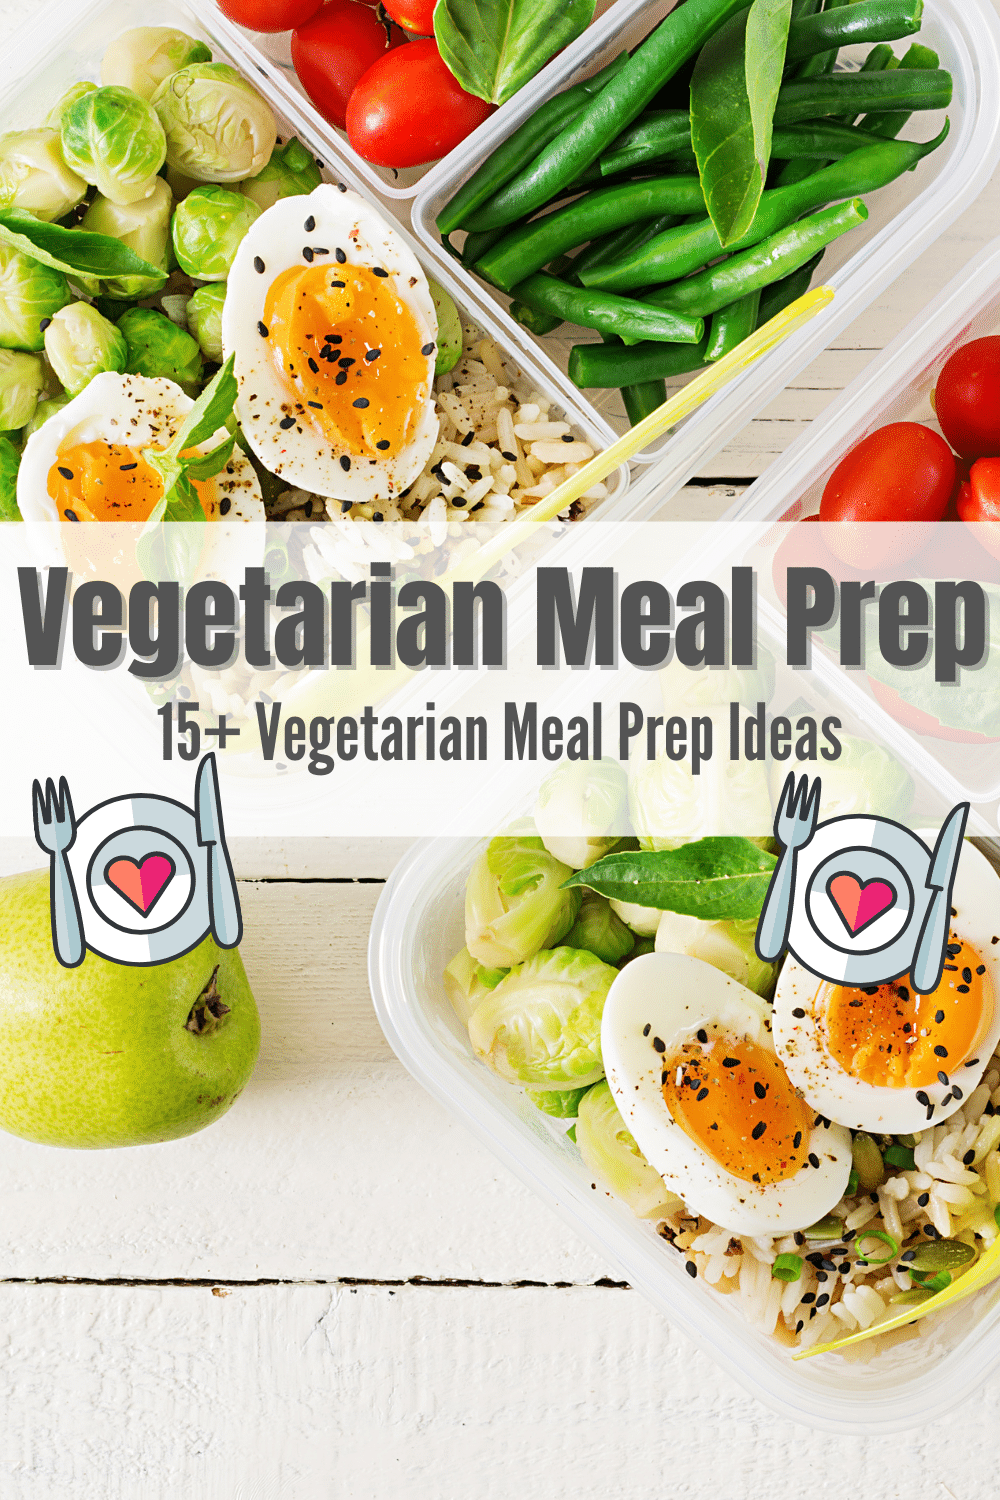 Text Overlay: Vegetarian Meal Prep This is over a white background with two clear meal prep containers filled with soft boiled eggs with pepper, brussels, green beans and tomatoes